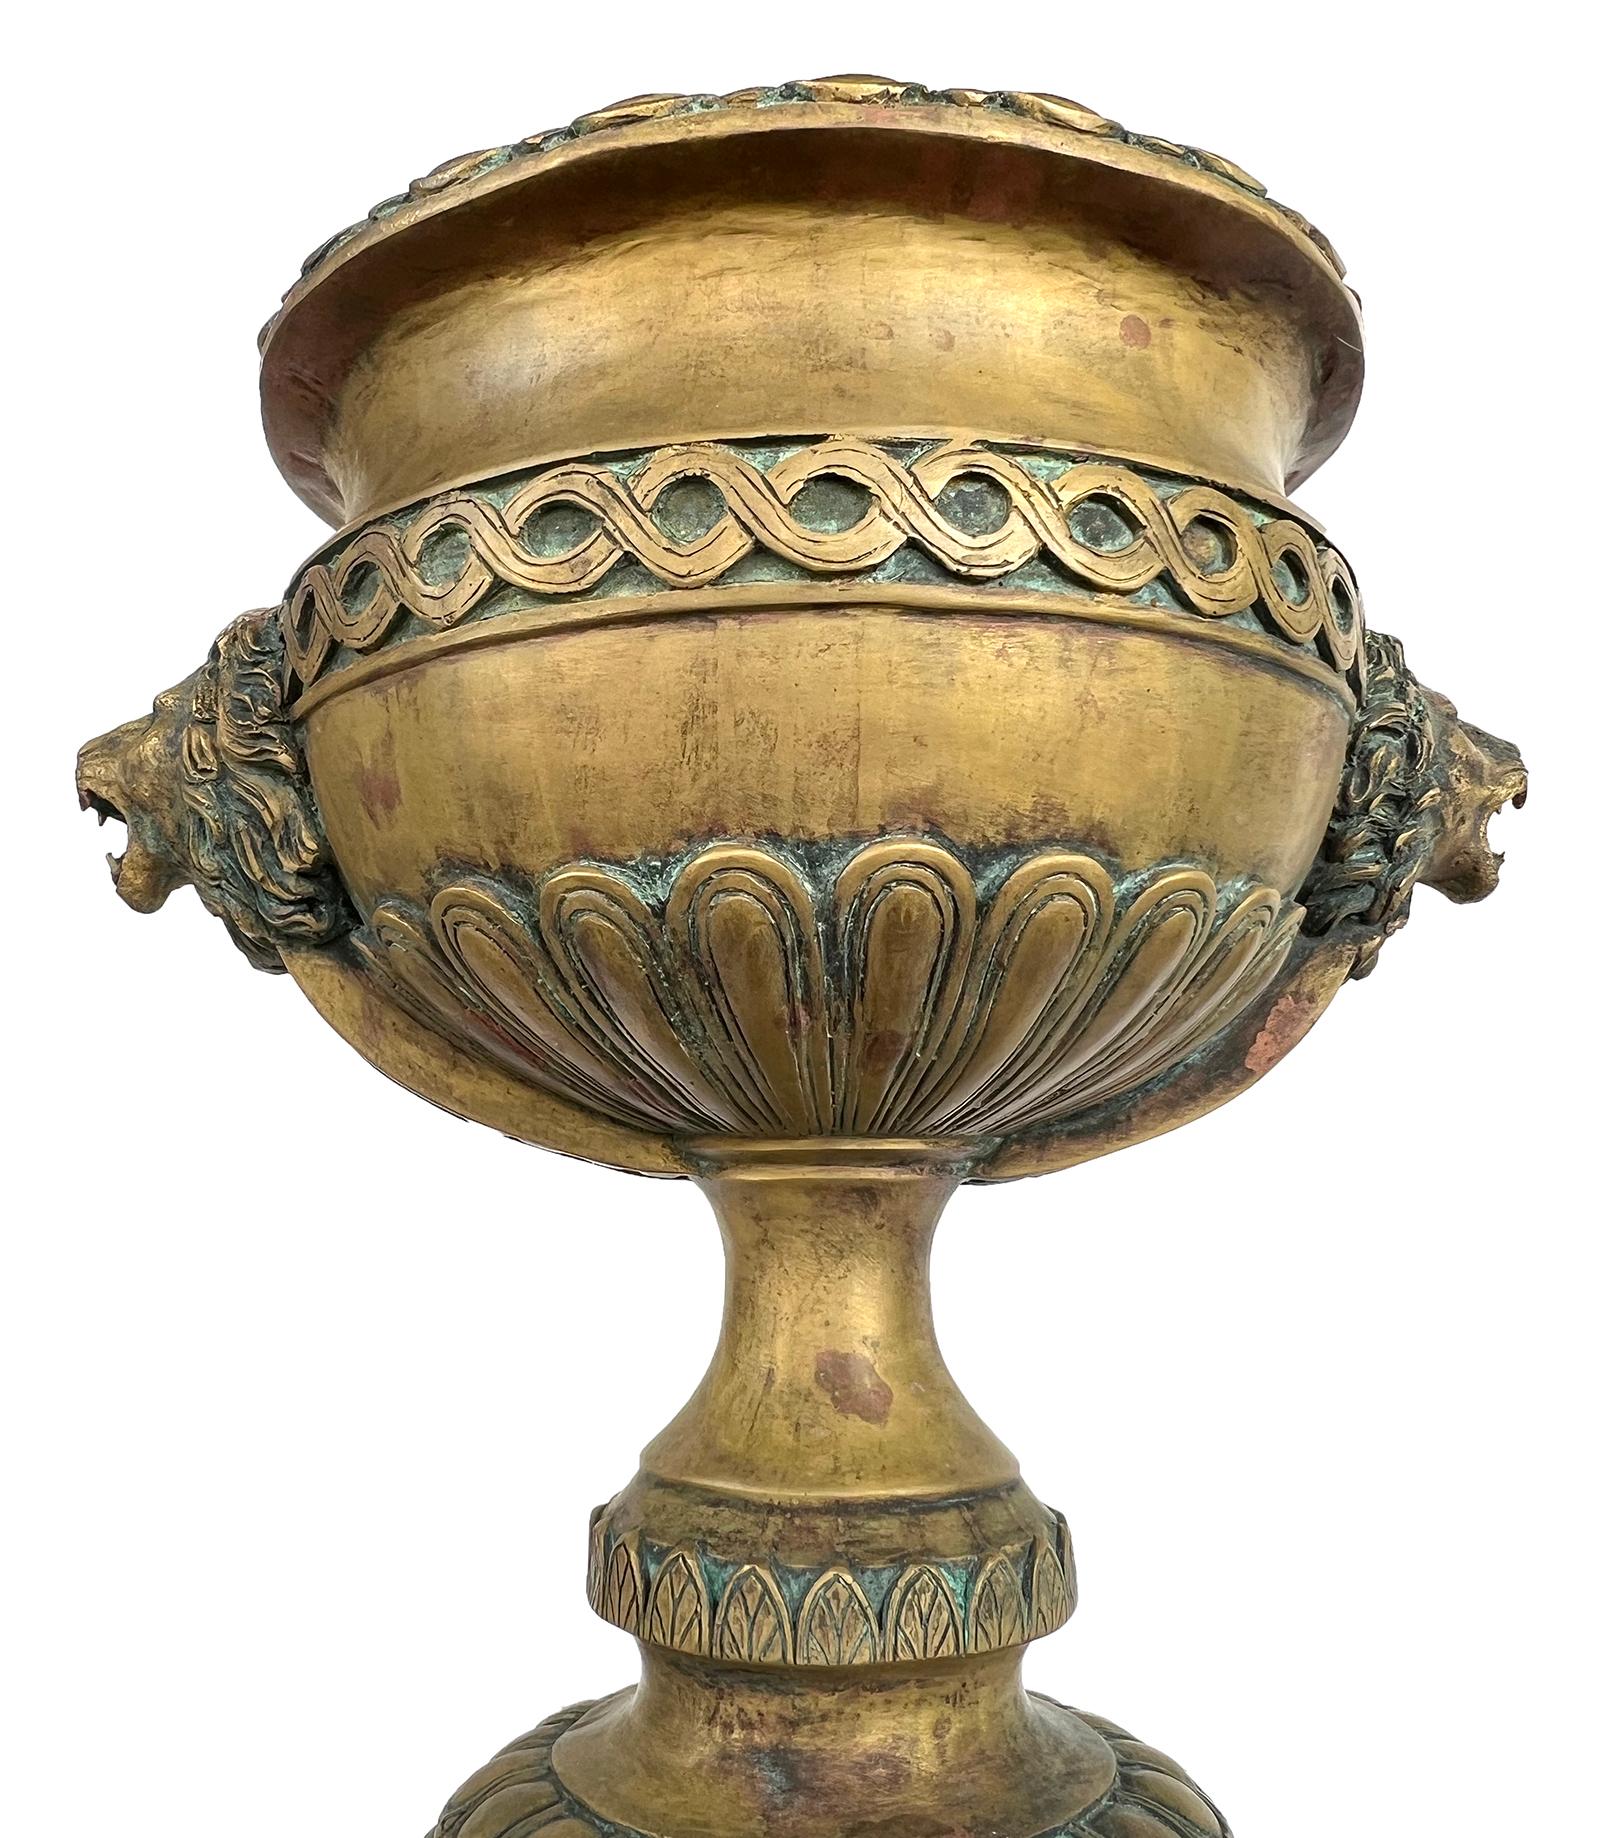 Of large scale and solid construction, the footed urn flanked by lion head handles and cast with guilloche and egg-and-dart bands.